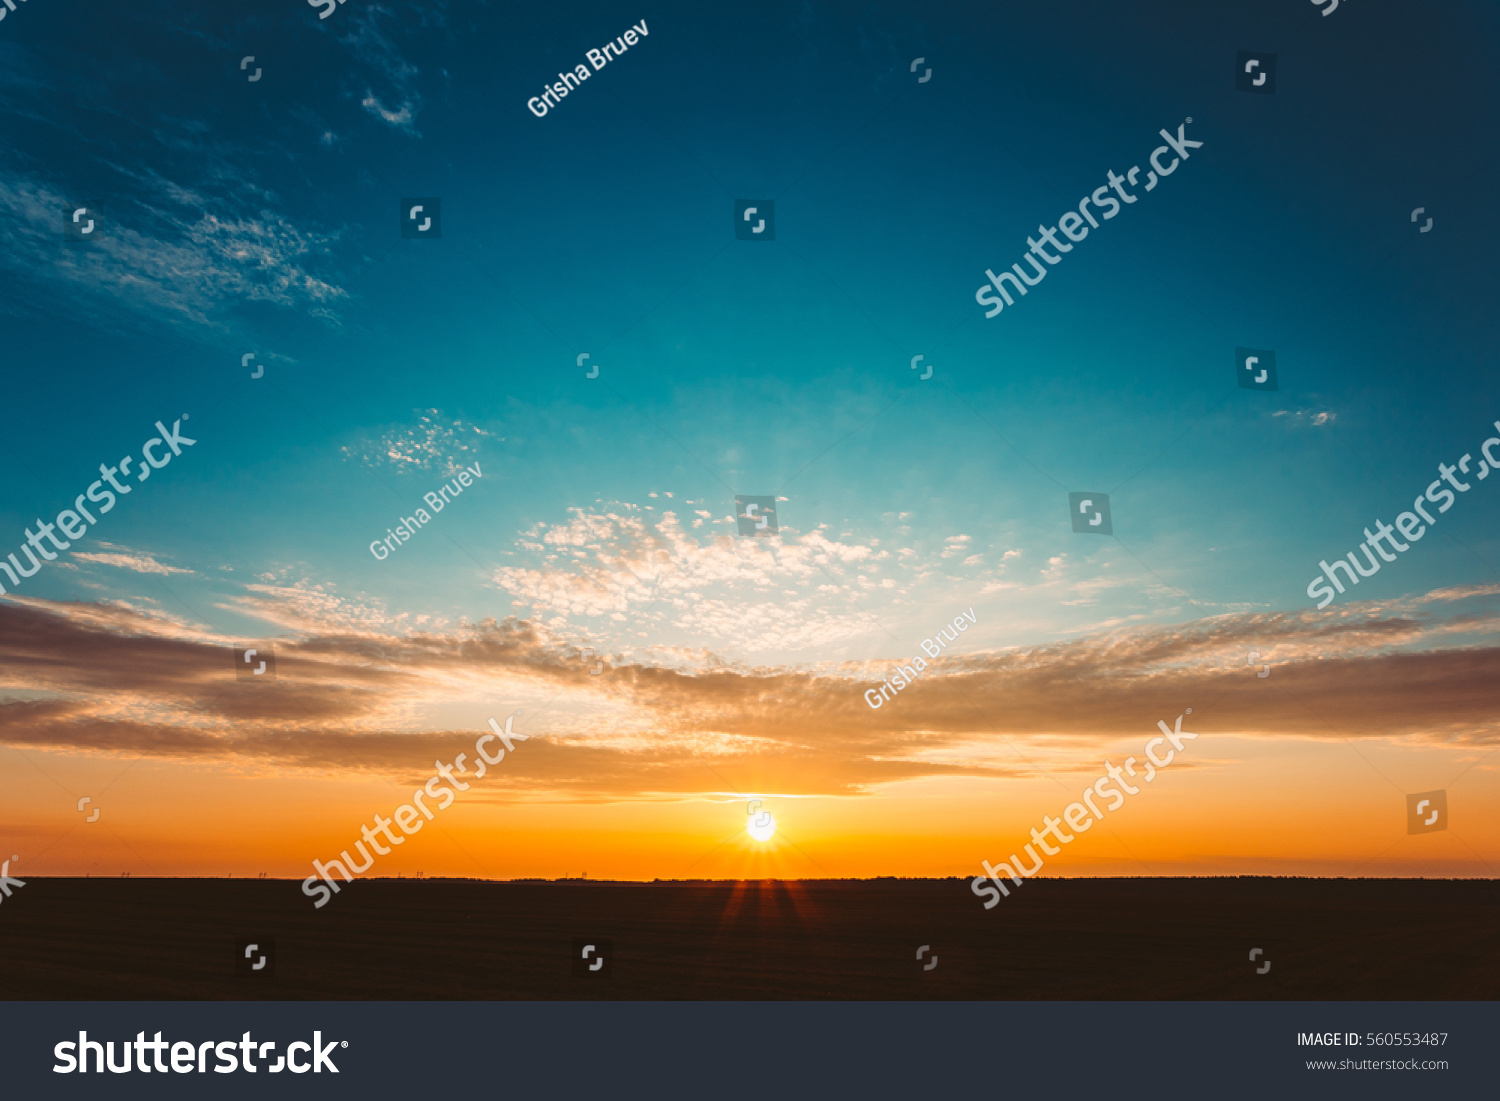 Natural Sunset Sunrise Over Field Or Meadow. Bright Dramatic Sky And Dark Ground. Countryside Landscape Under Scenic Colorful Sky At Sunset Dawn Sunrise. Sun Over Skyline, Horizon. Warm Colours. #560553487